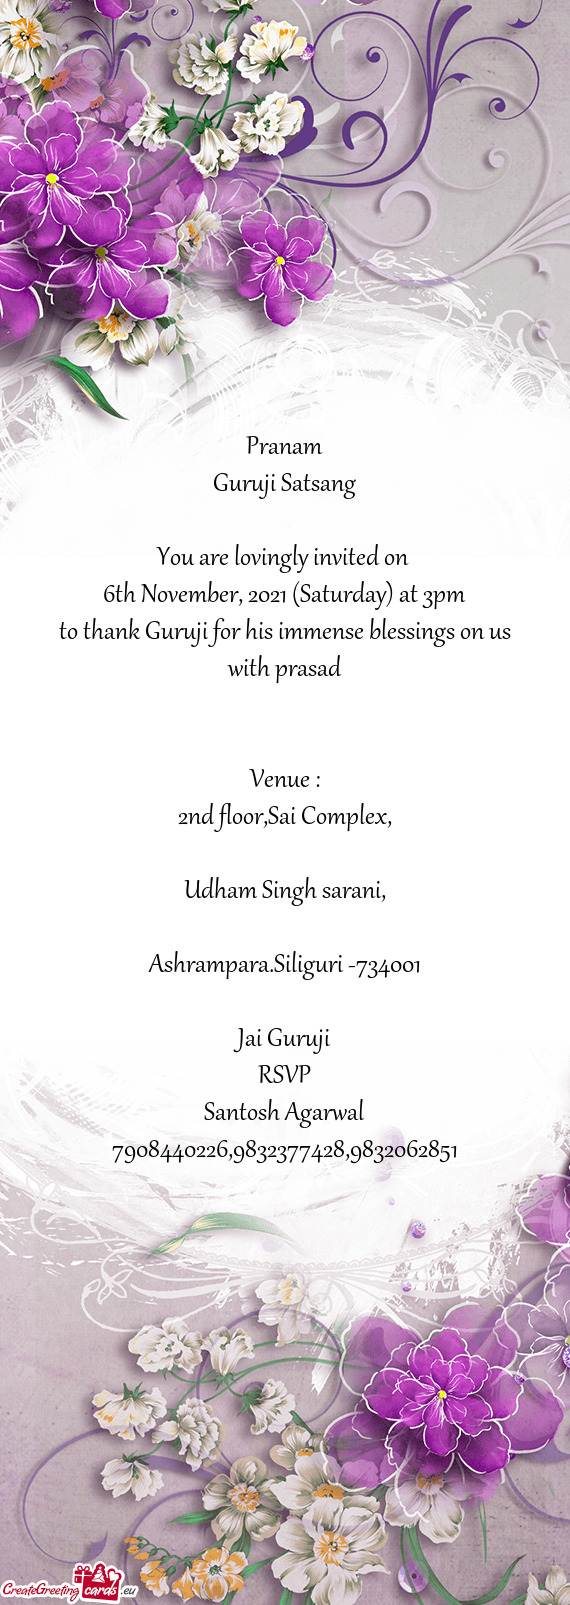 To thank Guruji for his immense blessings on us with prasad